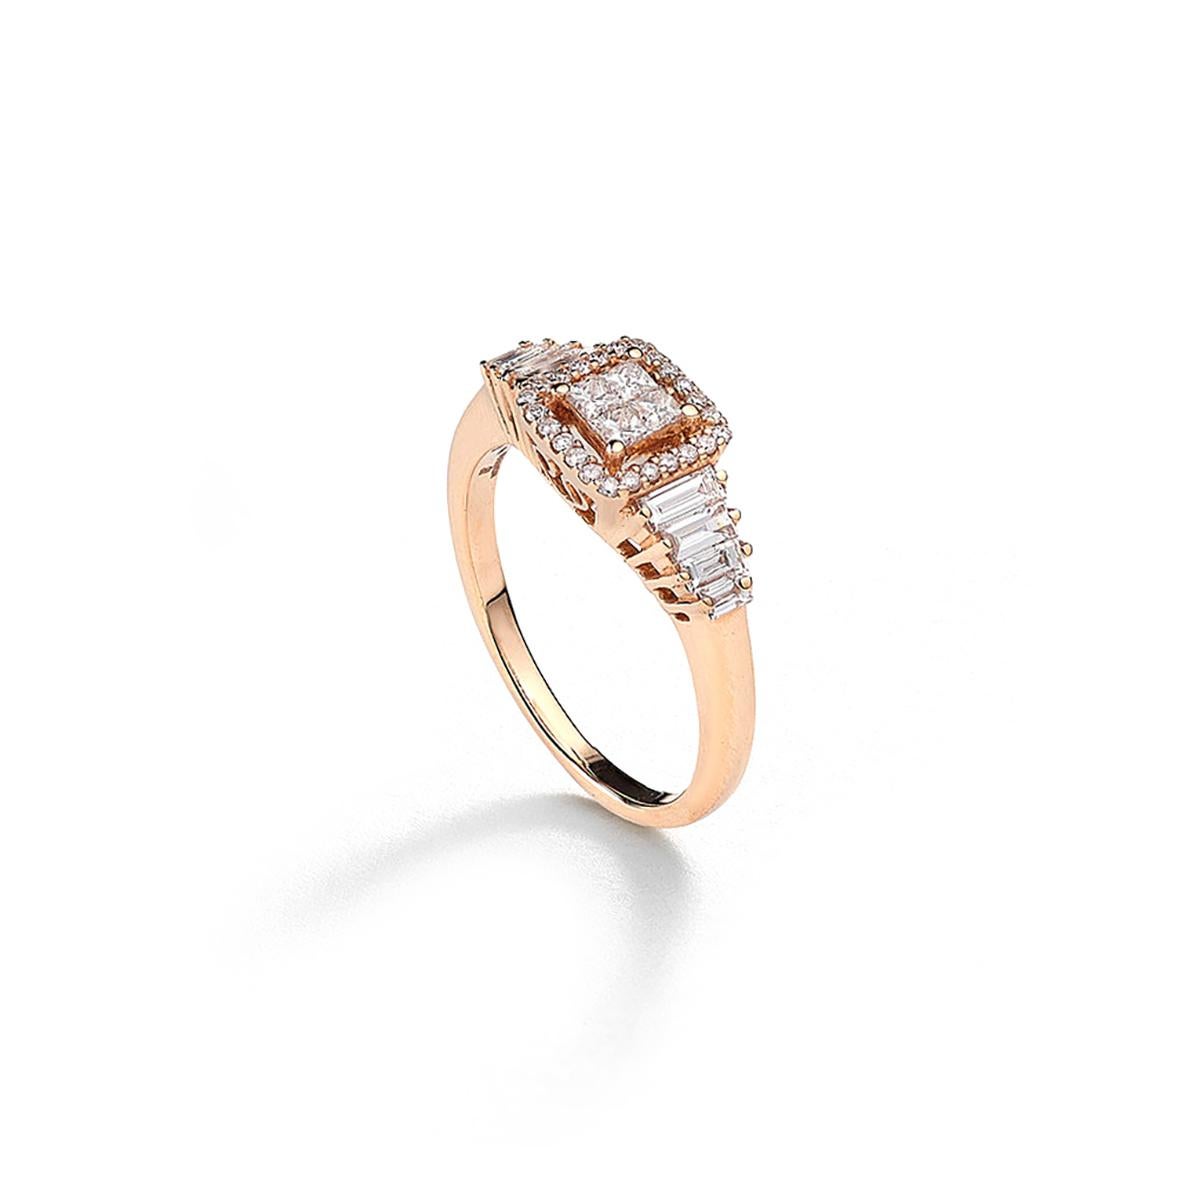 Ring in 18kt pink gold set with 12 baguette and princess cut diamonds 0.54 cts and 24 diamonds 0.09 cts Size 53

Total weight: 3.92 grams